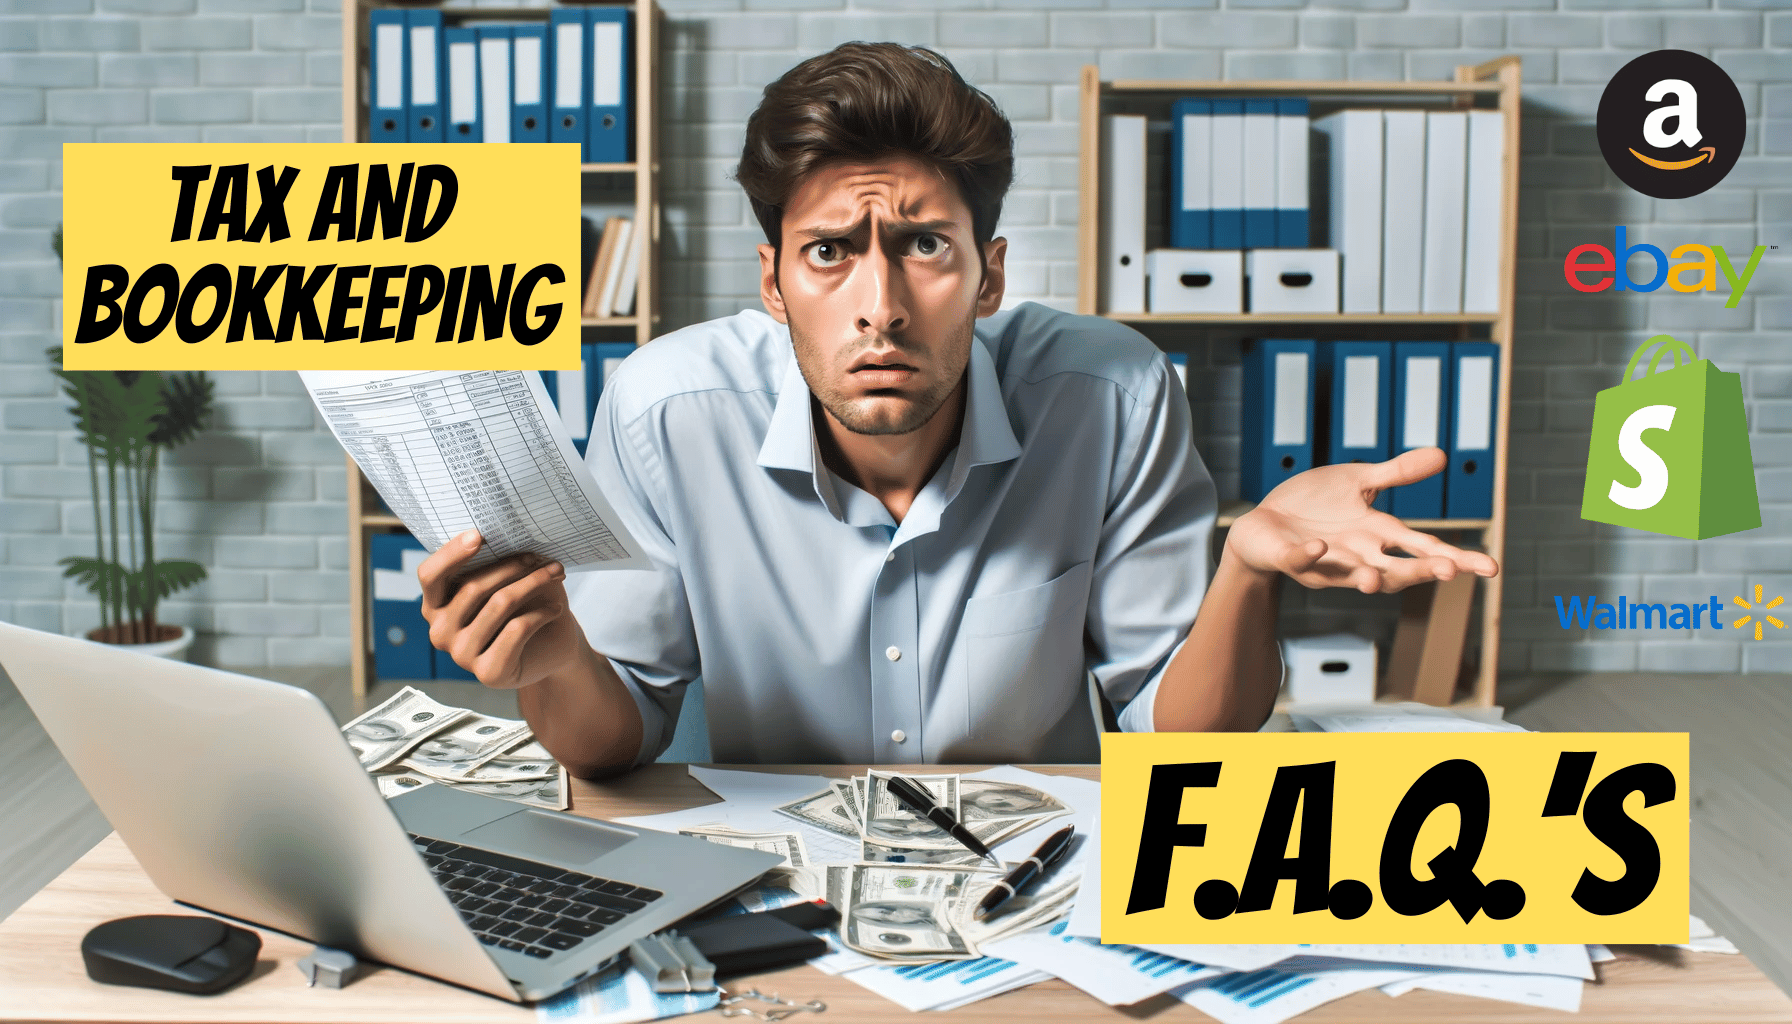 Tax and Bookkeeping Frequently Asked Questions for Amazon FBA sellers